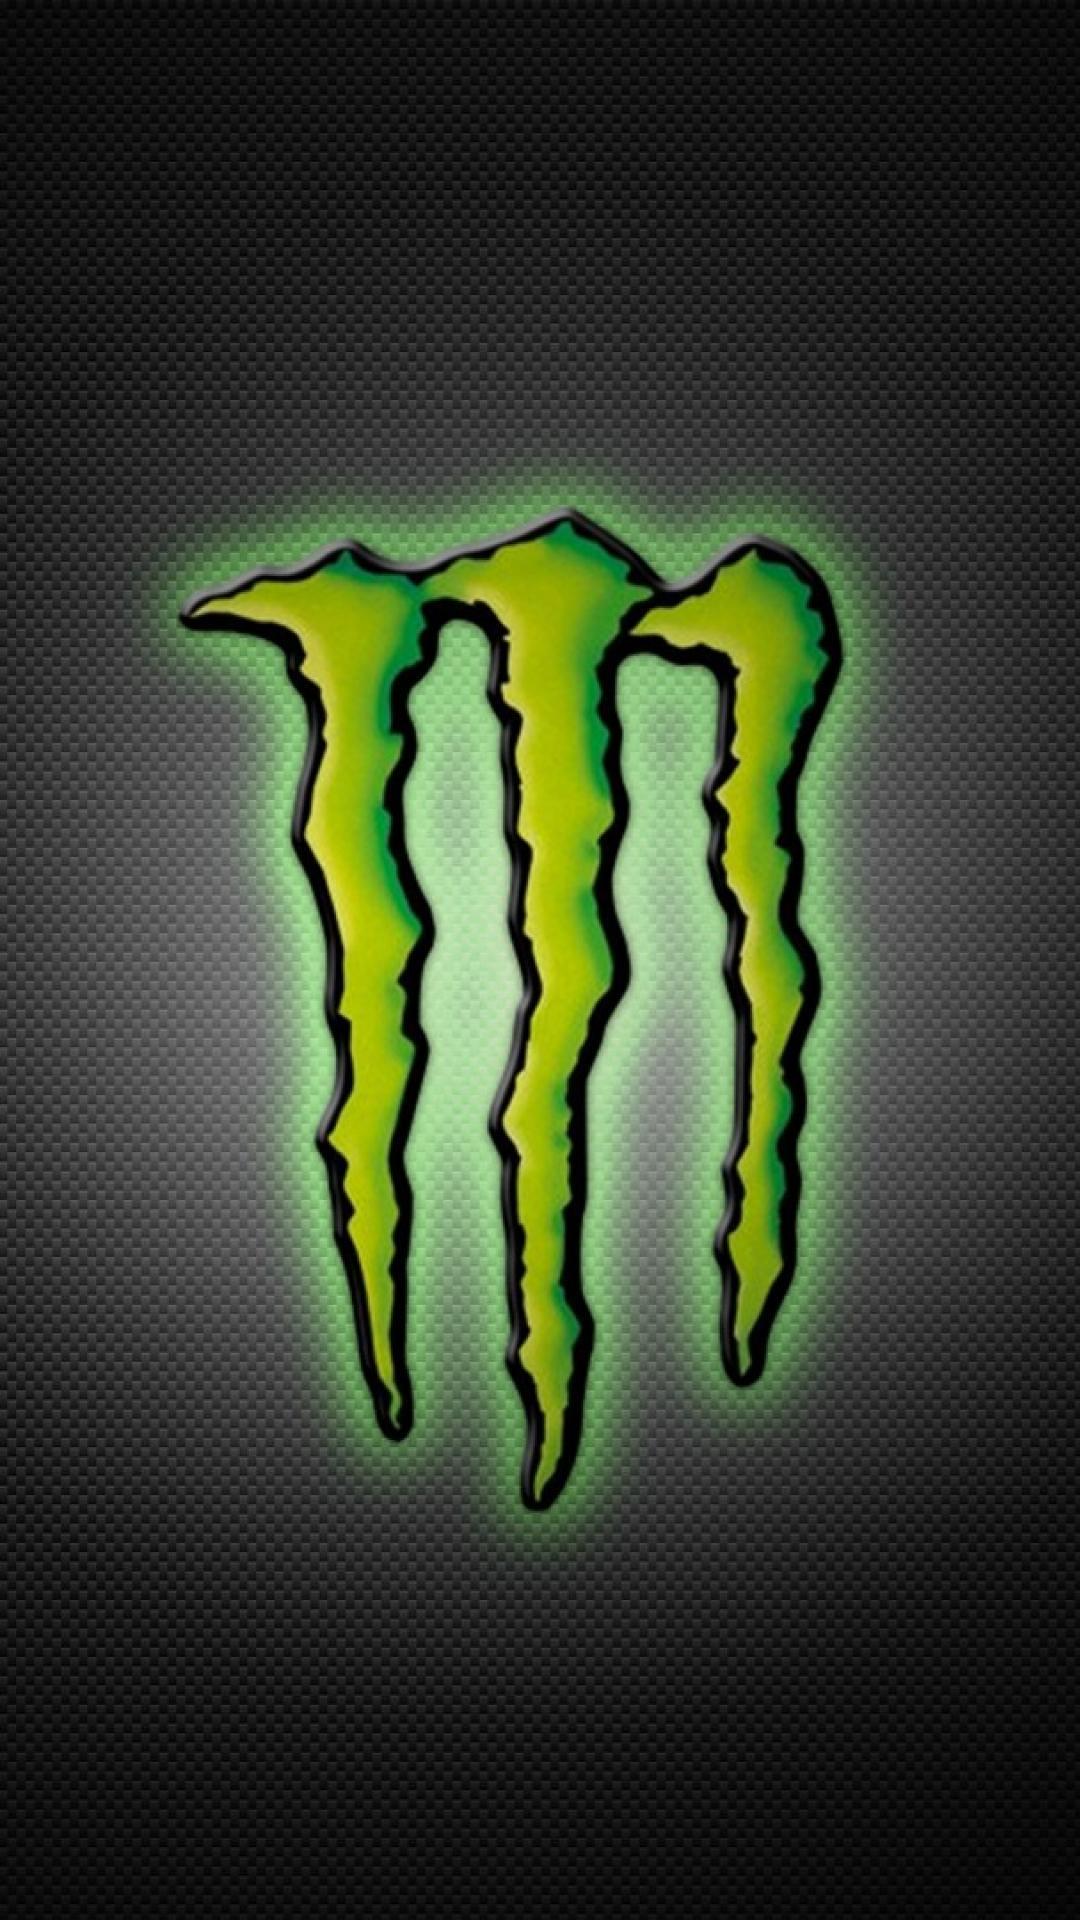 Monster Energy Iphone Wallpapers Top Free Monster Energy Iphone Backgrounds Wallpaperaccess